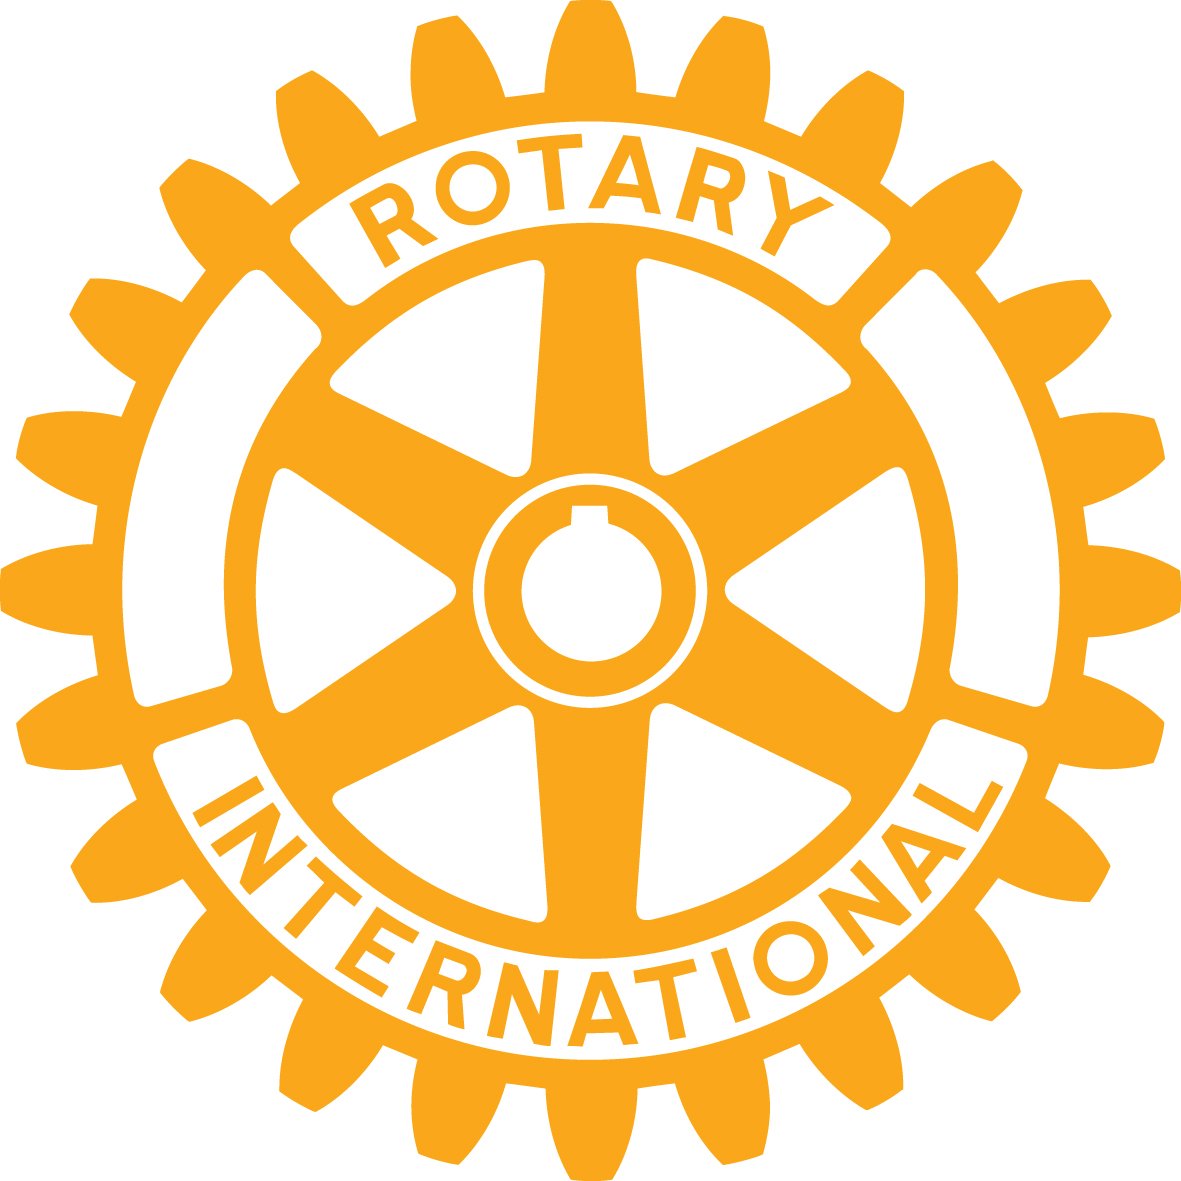 We are one of the thousands of rotary Clubs throughout the World. We are committed to serving communities locally and Worldwide.